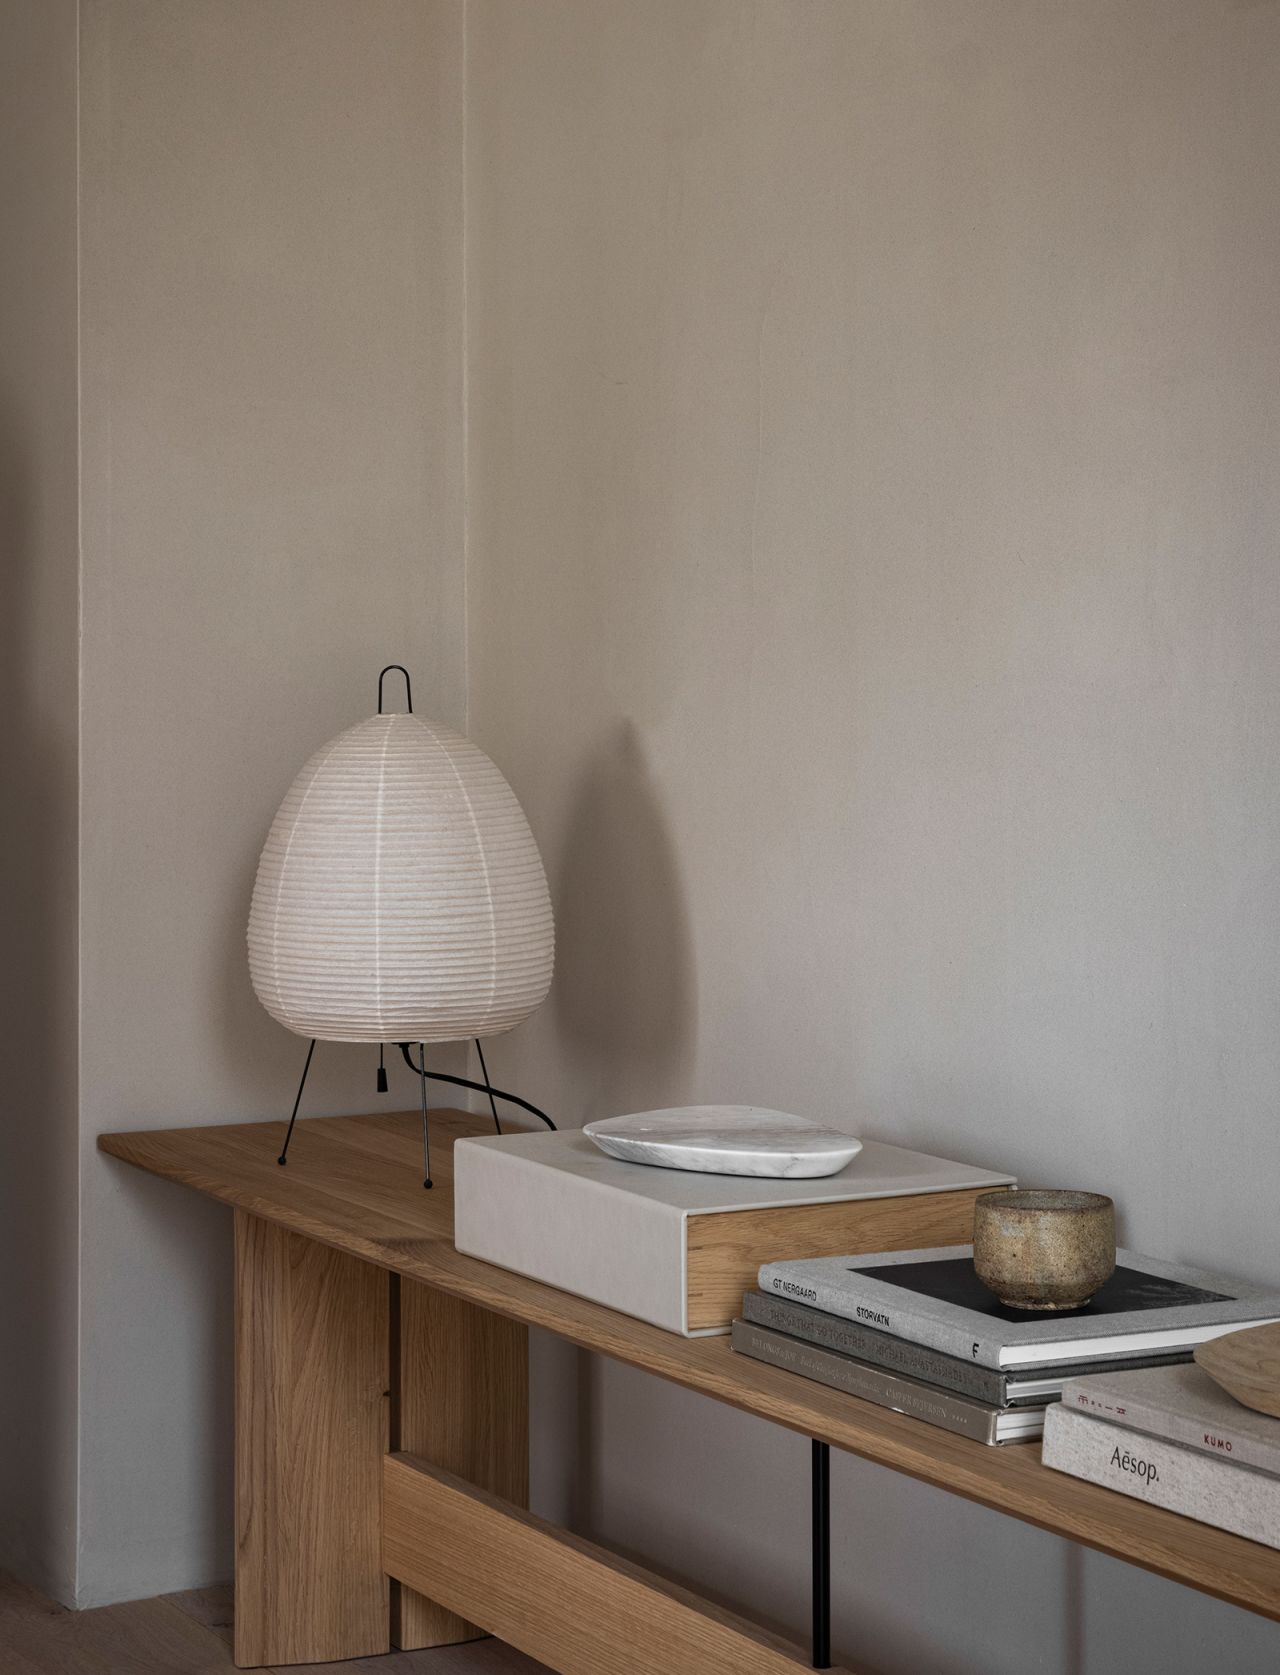 A delicate paper latern complements a neat bookshelf, designed by Norm Architects.